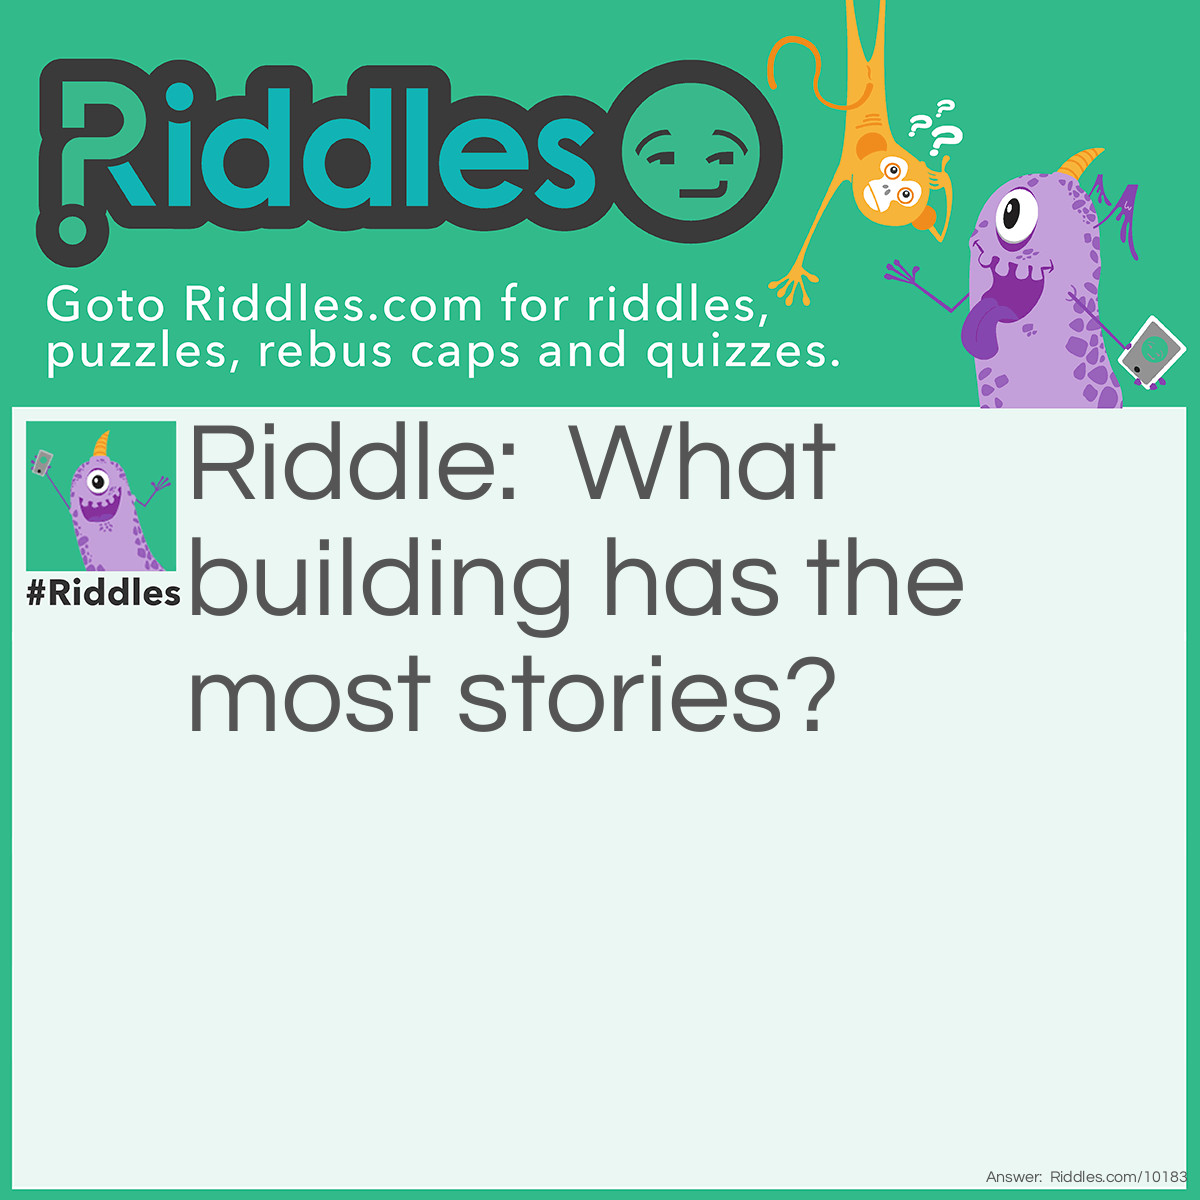 Riddle: What building has the most stories? Answer: Libraries.